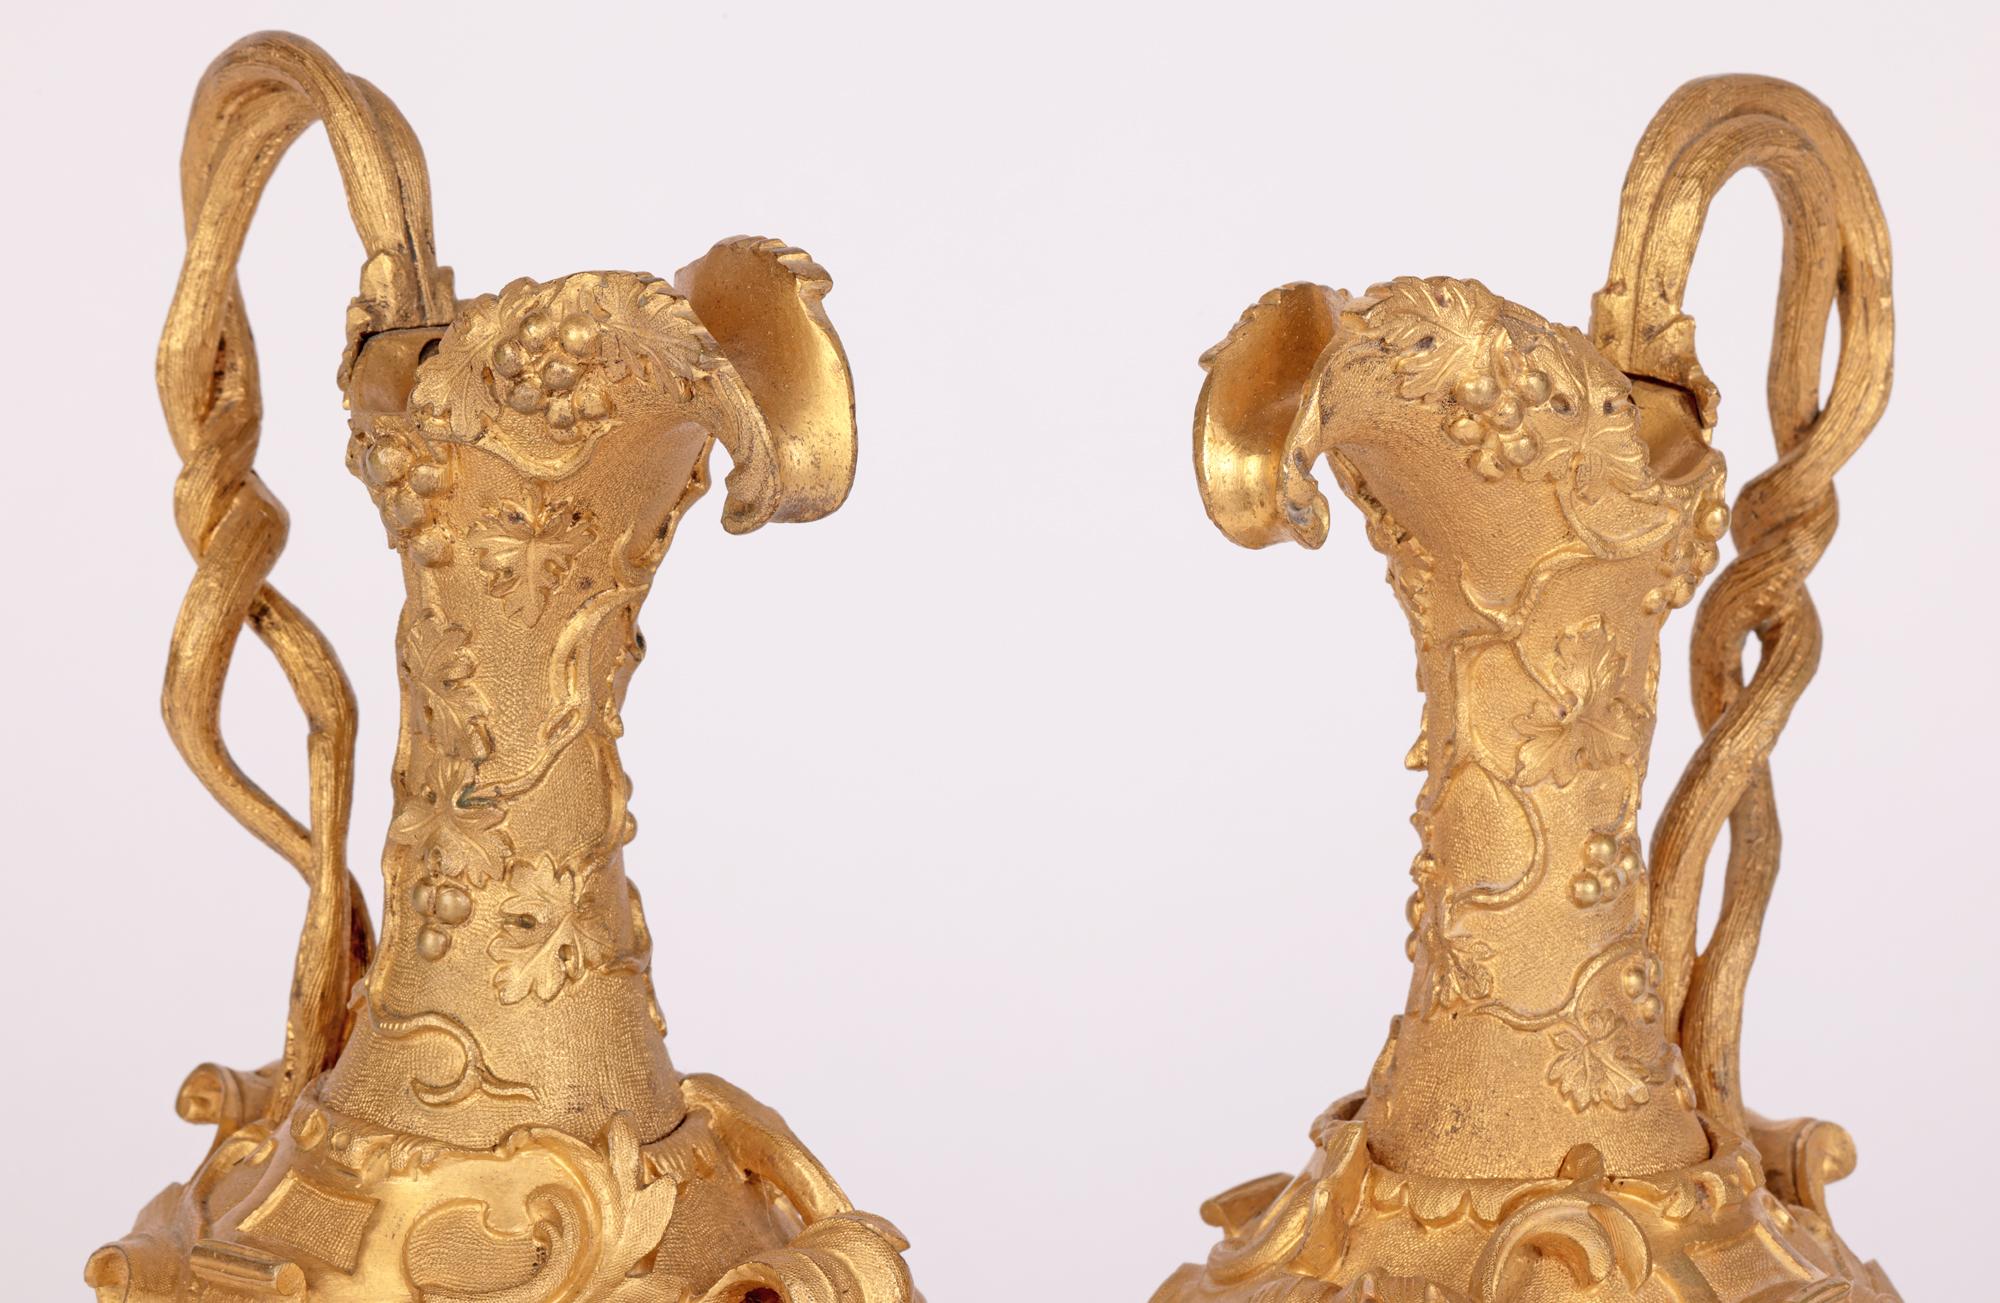 A very fine pair antique French neo-classical gilded bronze ornamental ewers applied with scroll and vine designs dating from the 19th century. The ewers stand on a scroll and molded shell decorated rounded base with column form stems support